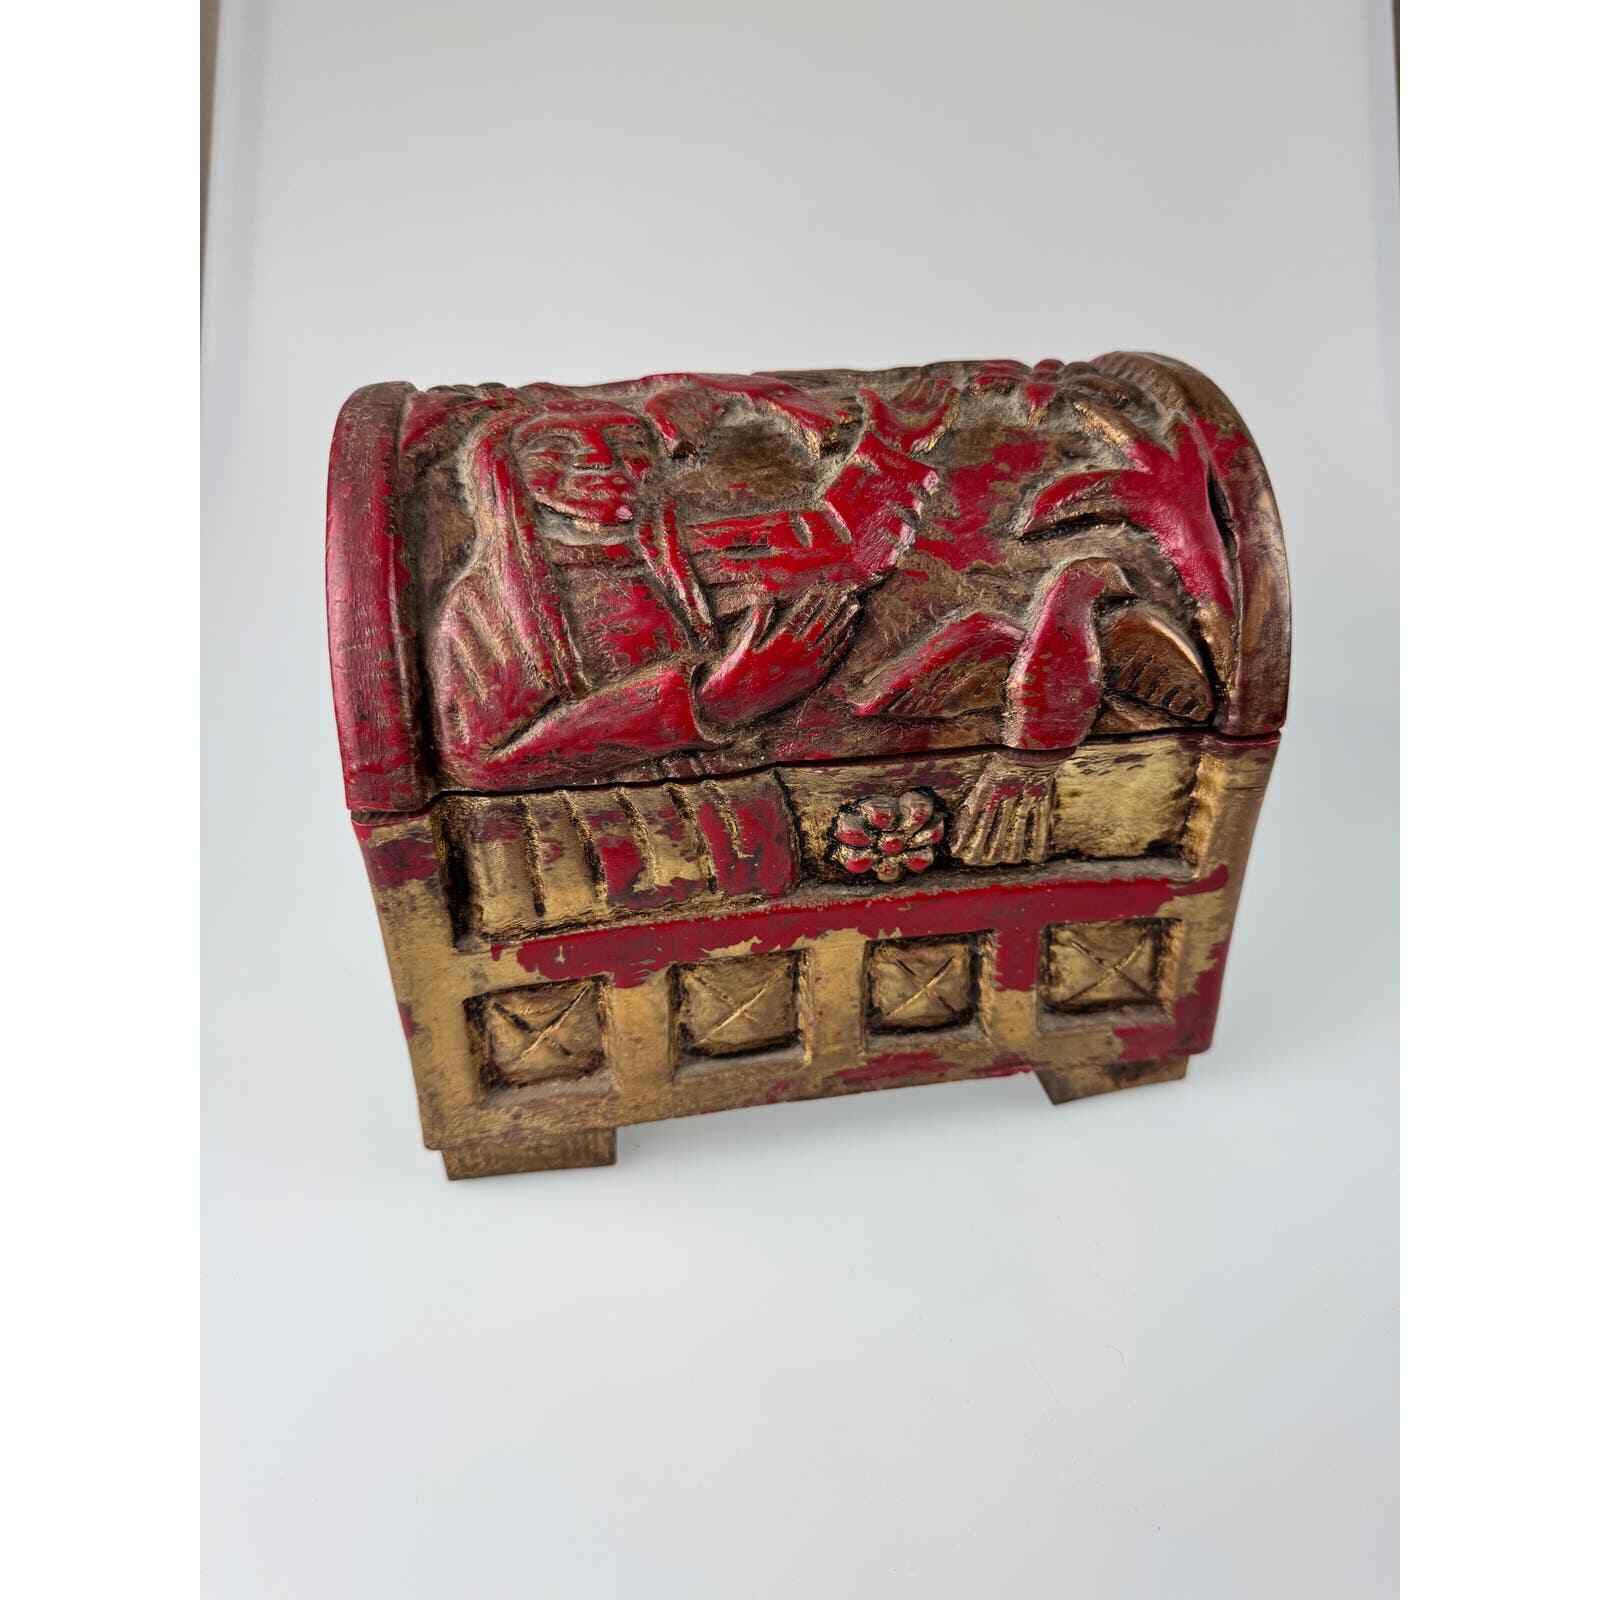 Vintage Red and Gold Composite Treasure Chest with Bird and Flower Motif 